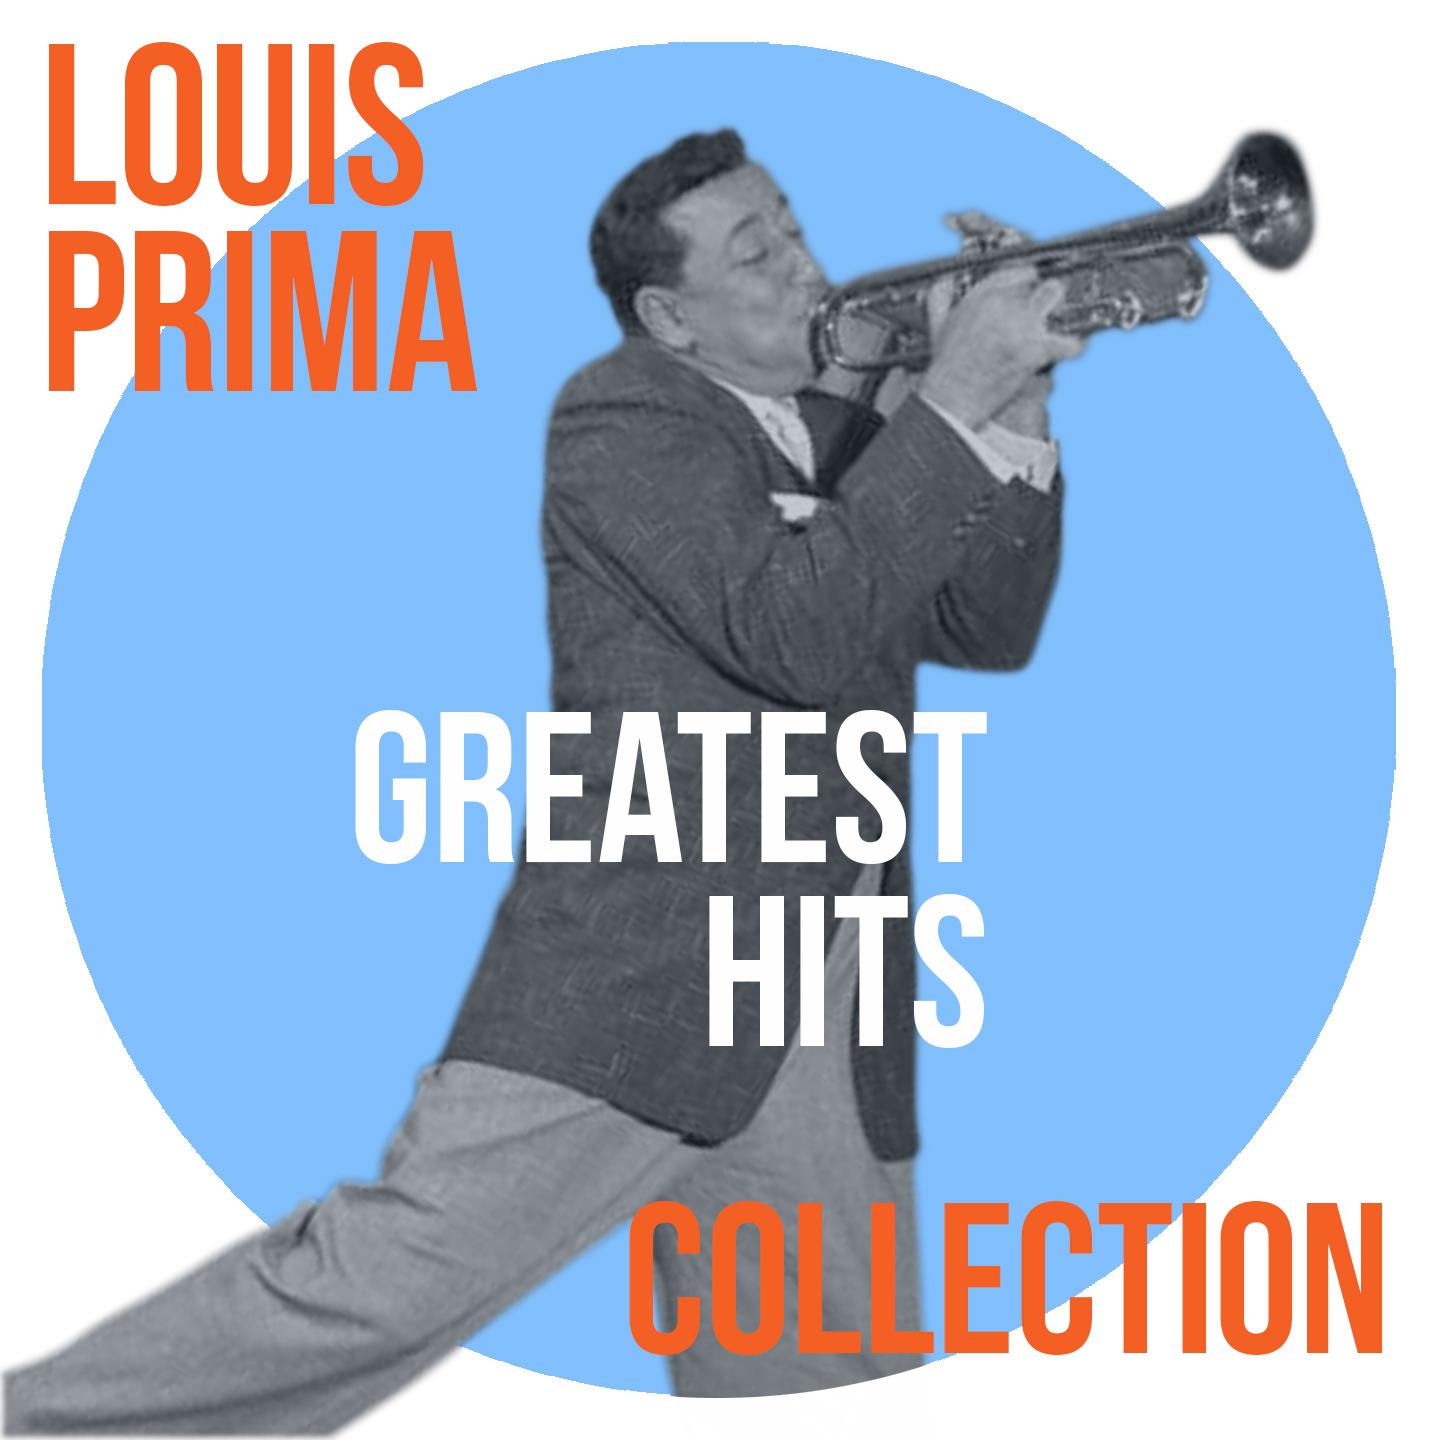 Louis Prima Greatest Hits Collection